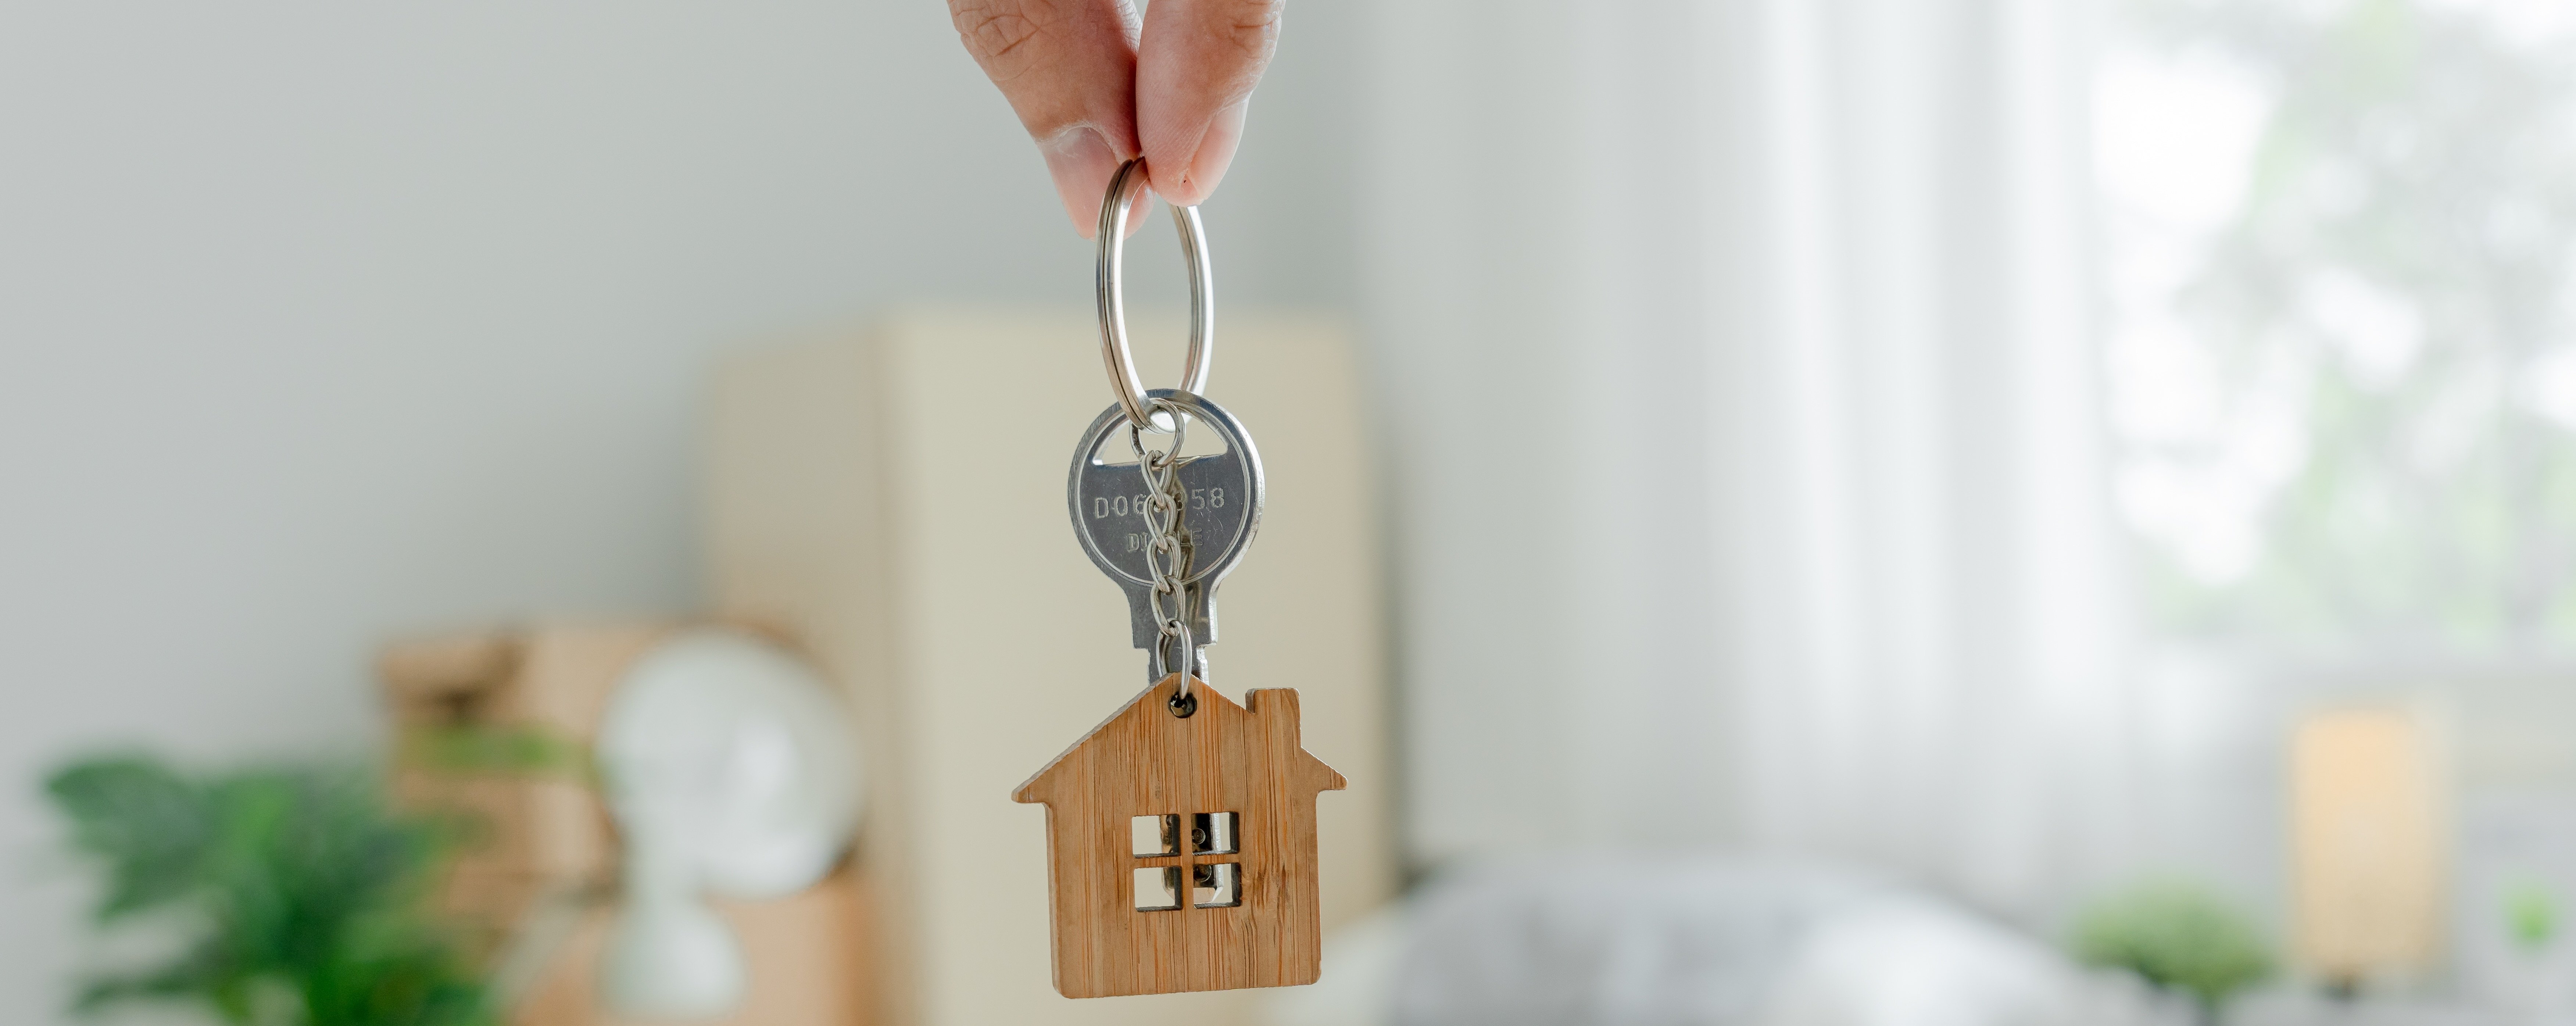 The upcoming property laws that landlords should know about